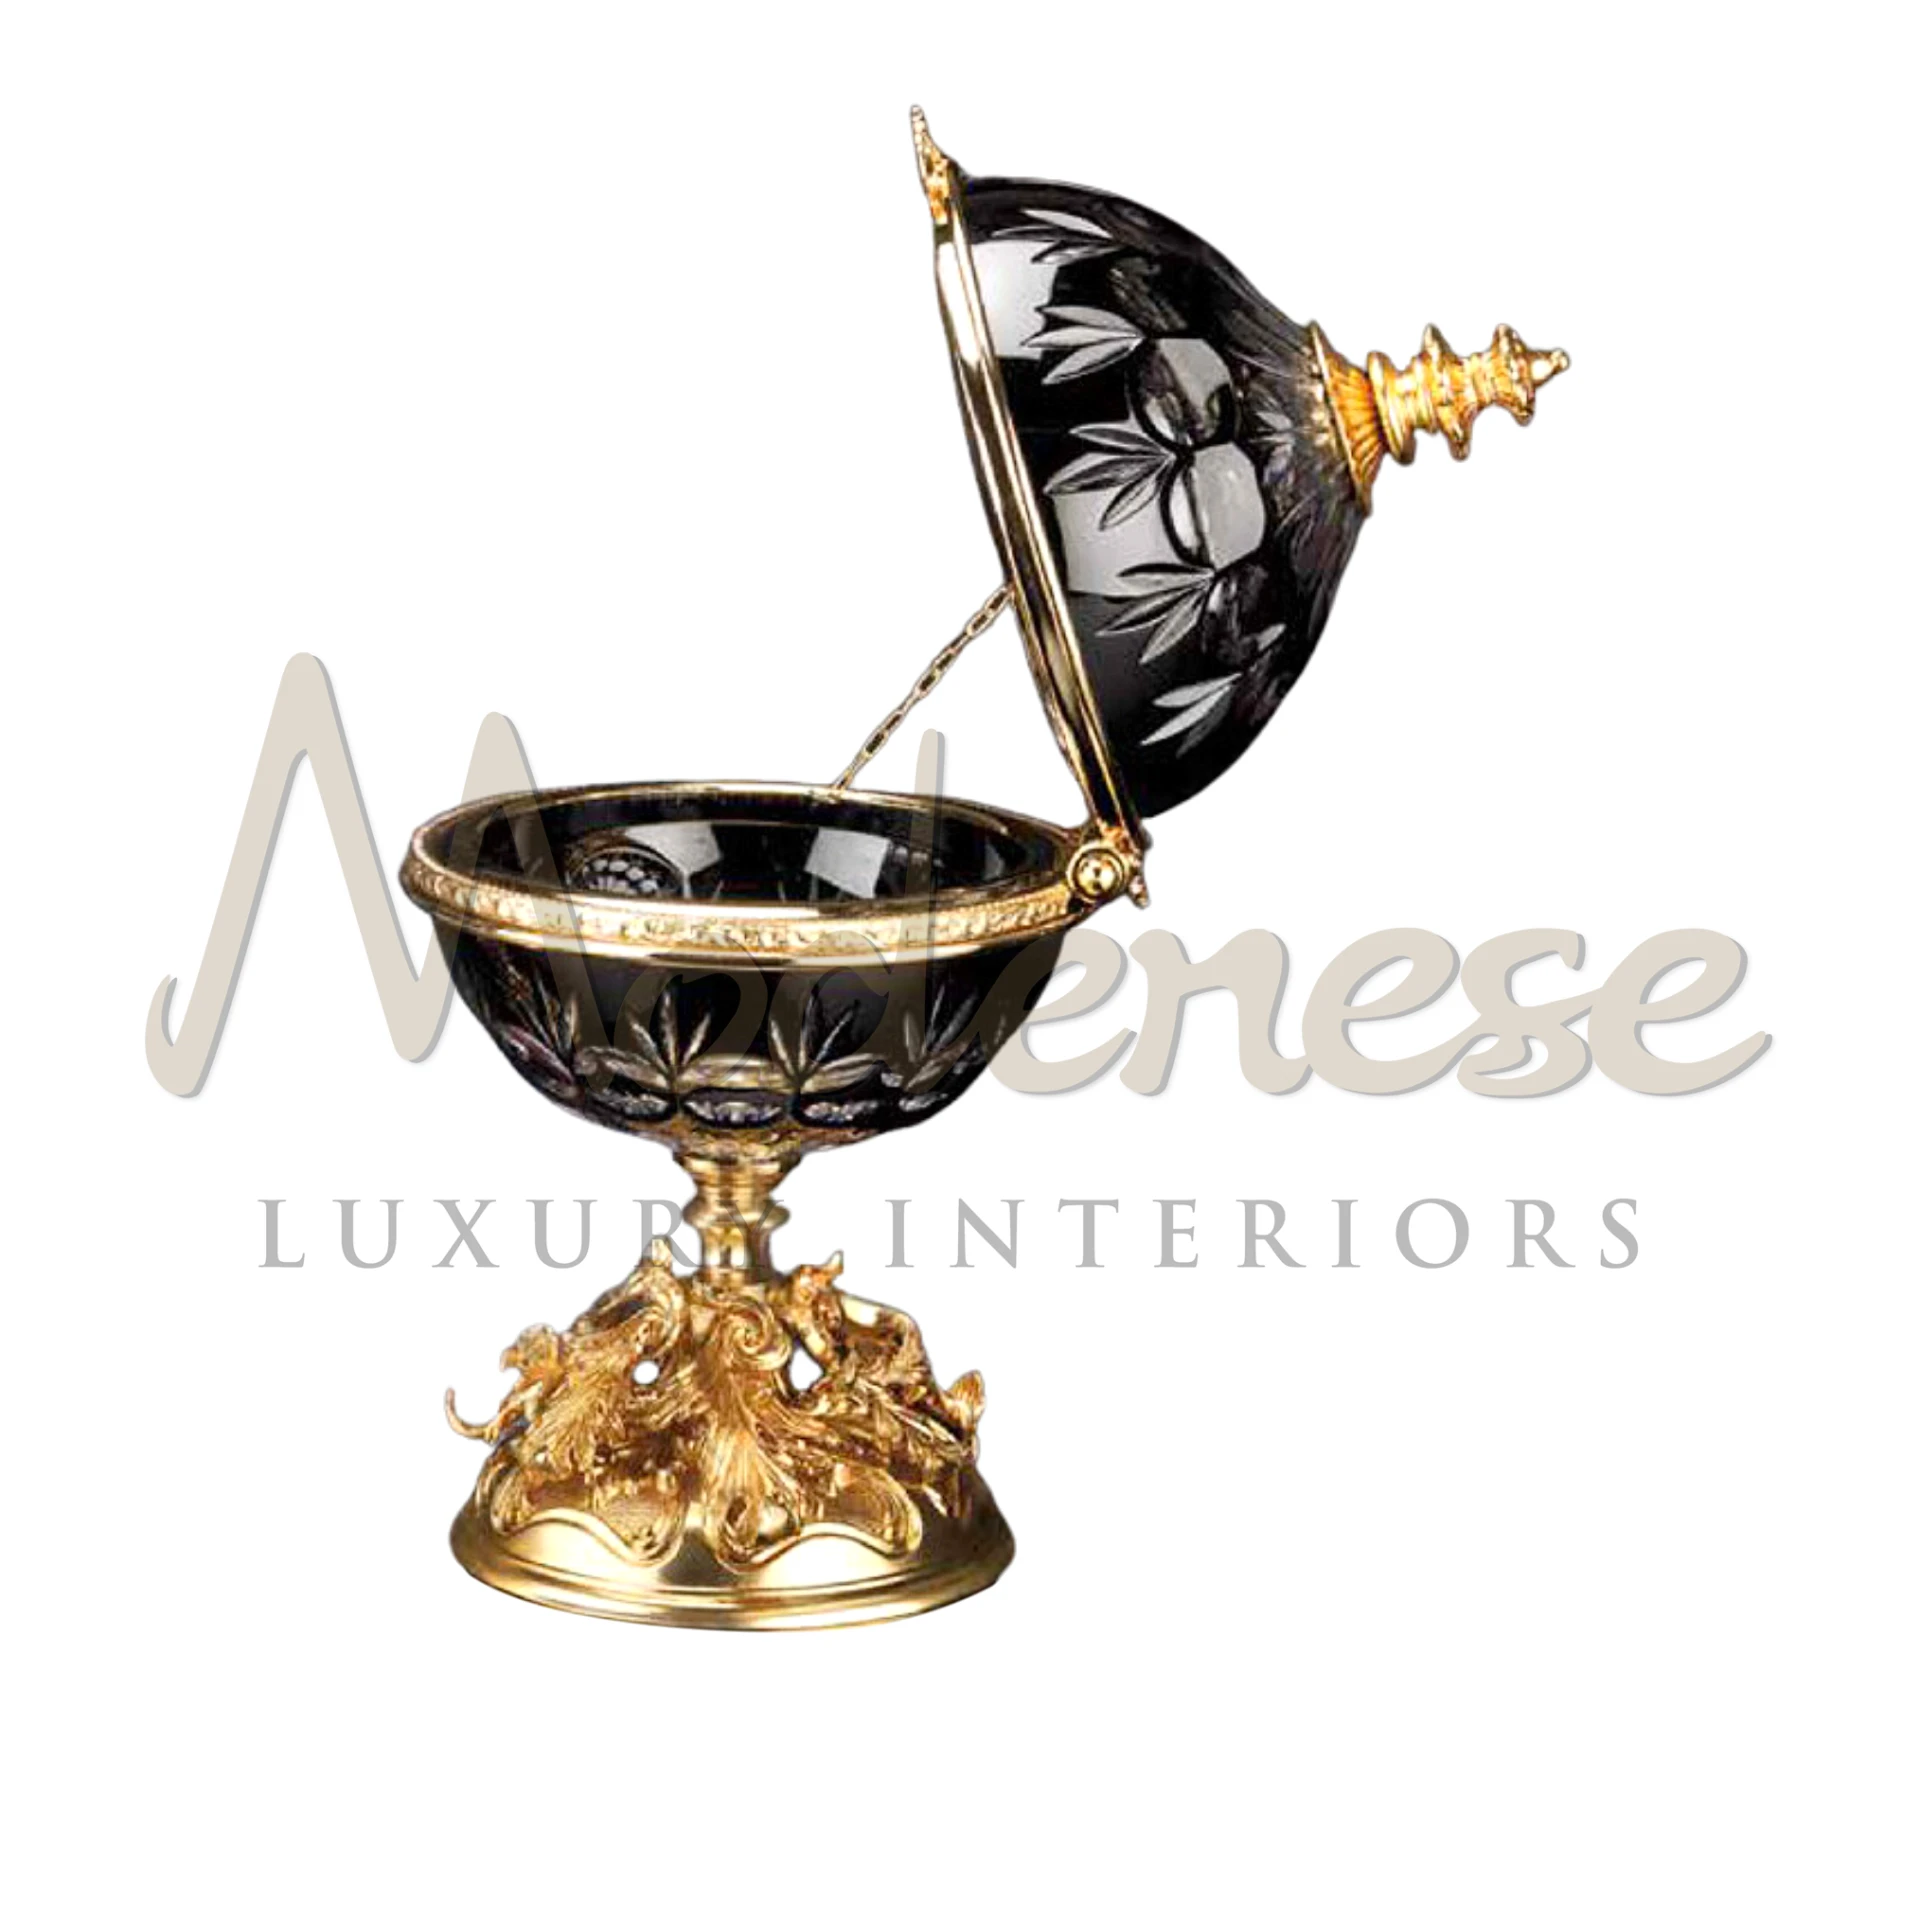 Elegant Classical Black Glass Box, perfect for storing precious items like jewelry in luxury interiors, offering a sleek and functional design with classic appeal.






